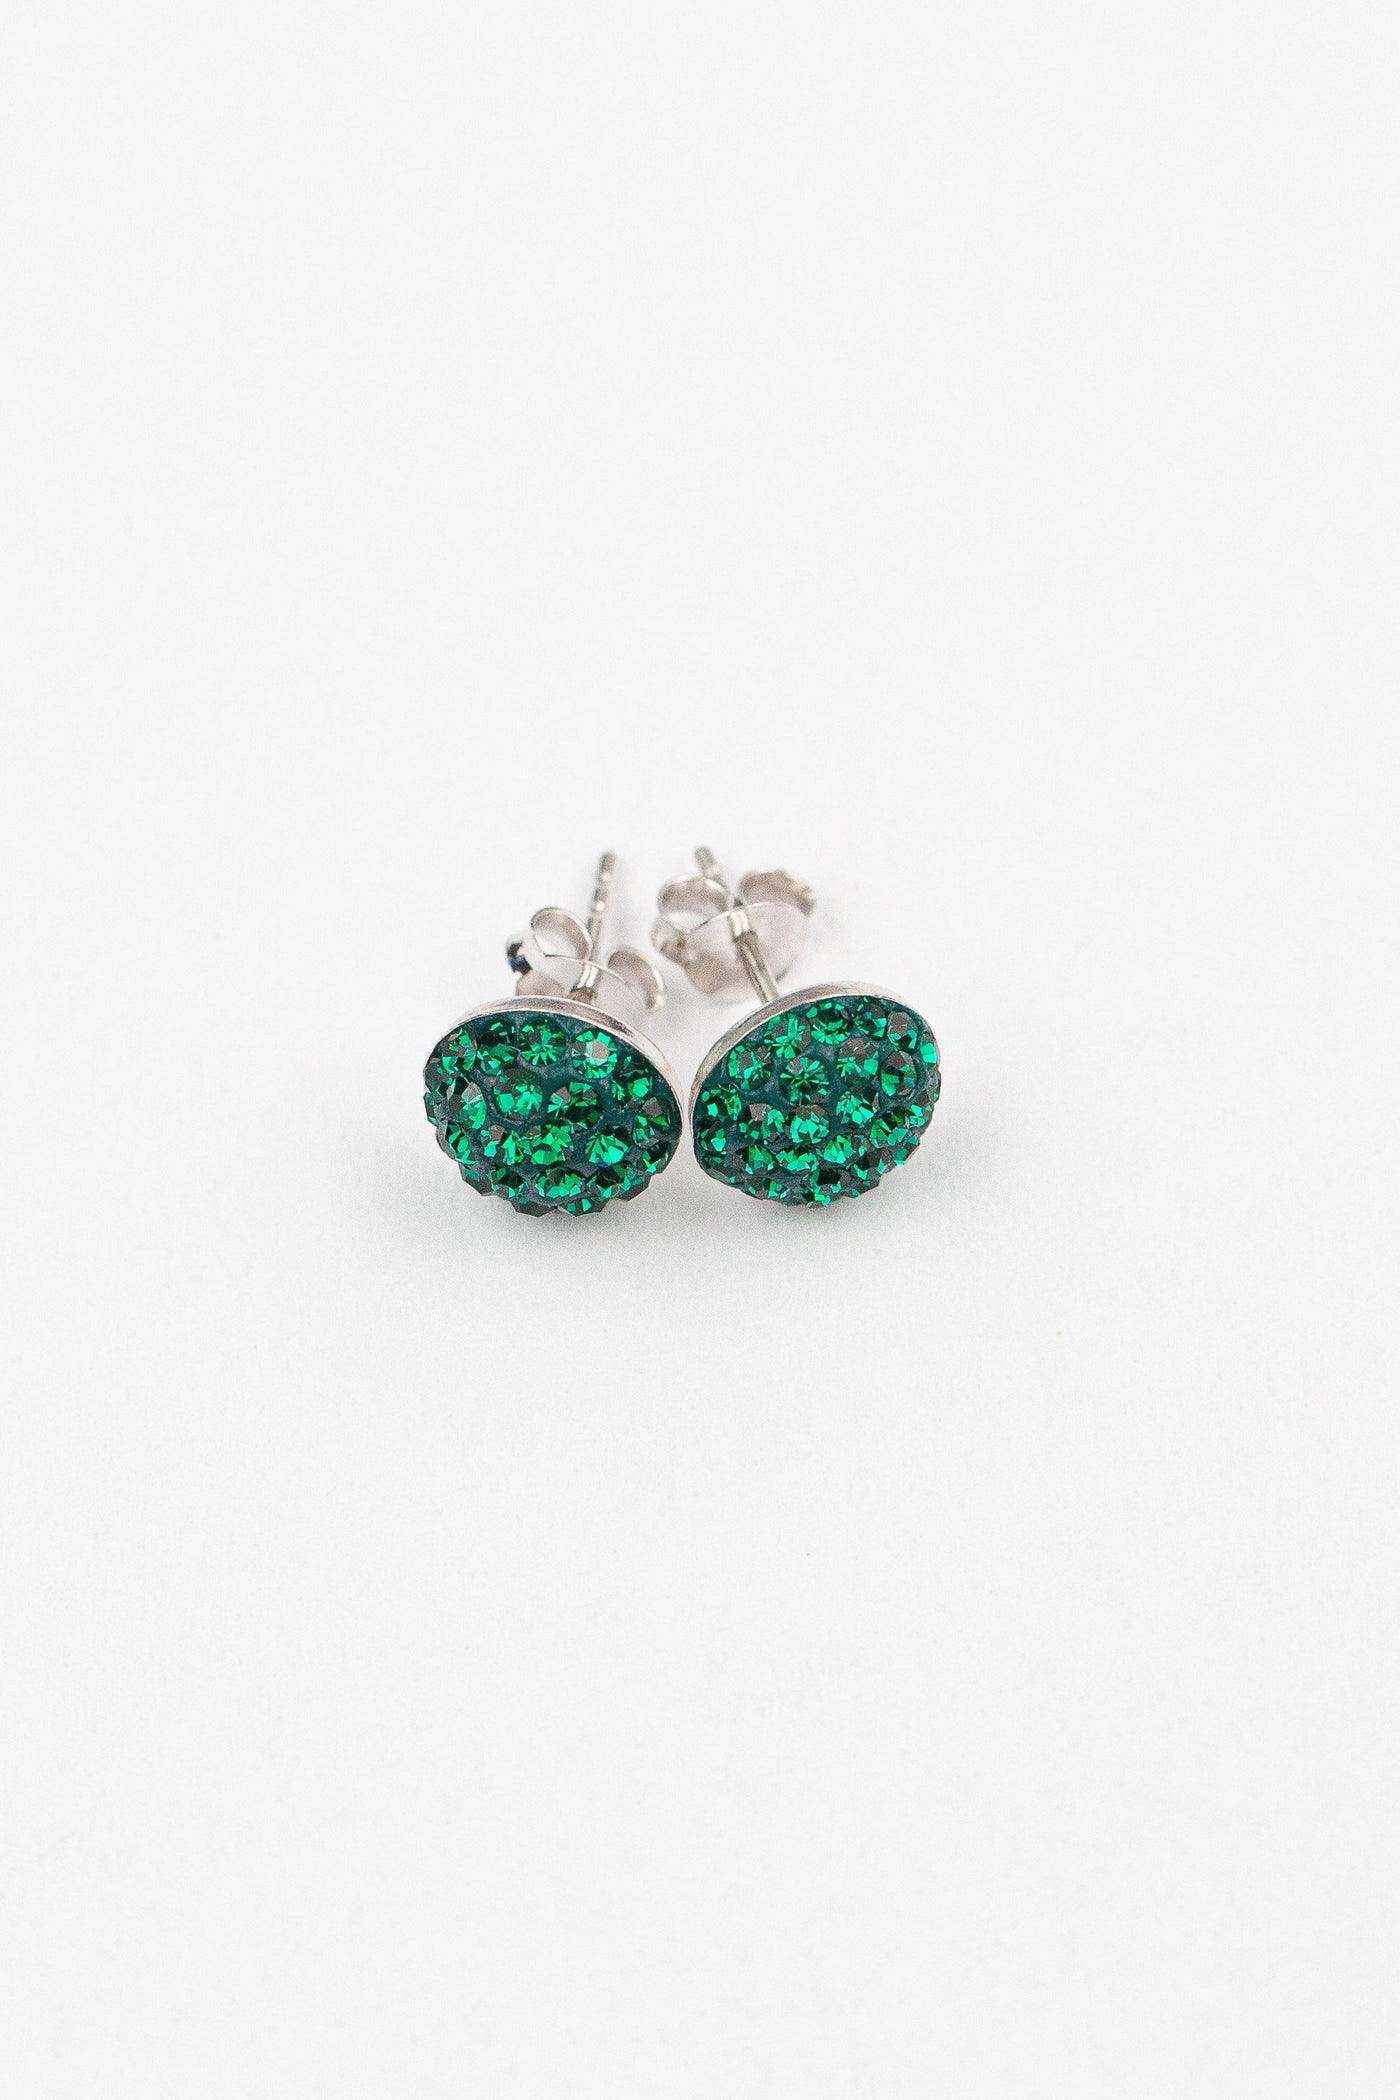 9mm Round Swarovski Crystal Sterling Silver Earring in Emerald | Annie and Sisters | sister stud earrings, for kids, children's jewelry, kid's jewelry, best friend